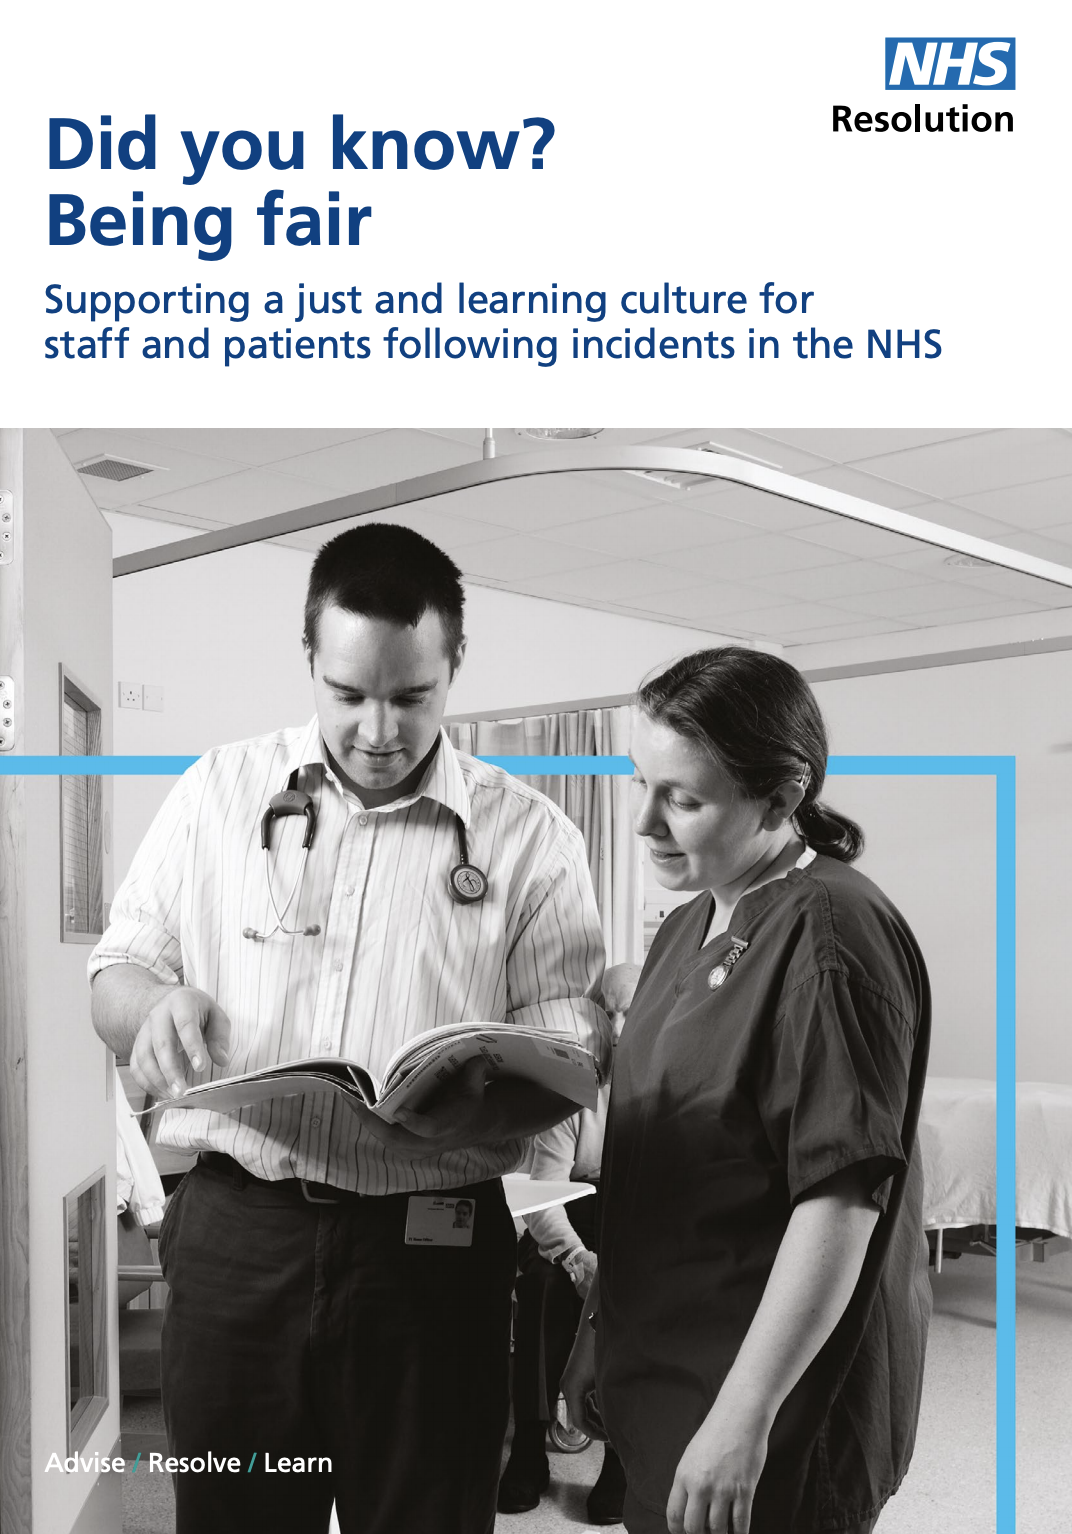 Communications officer - challenging NHS workplace culture featured image